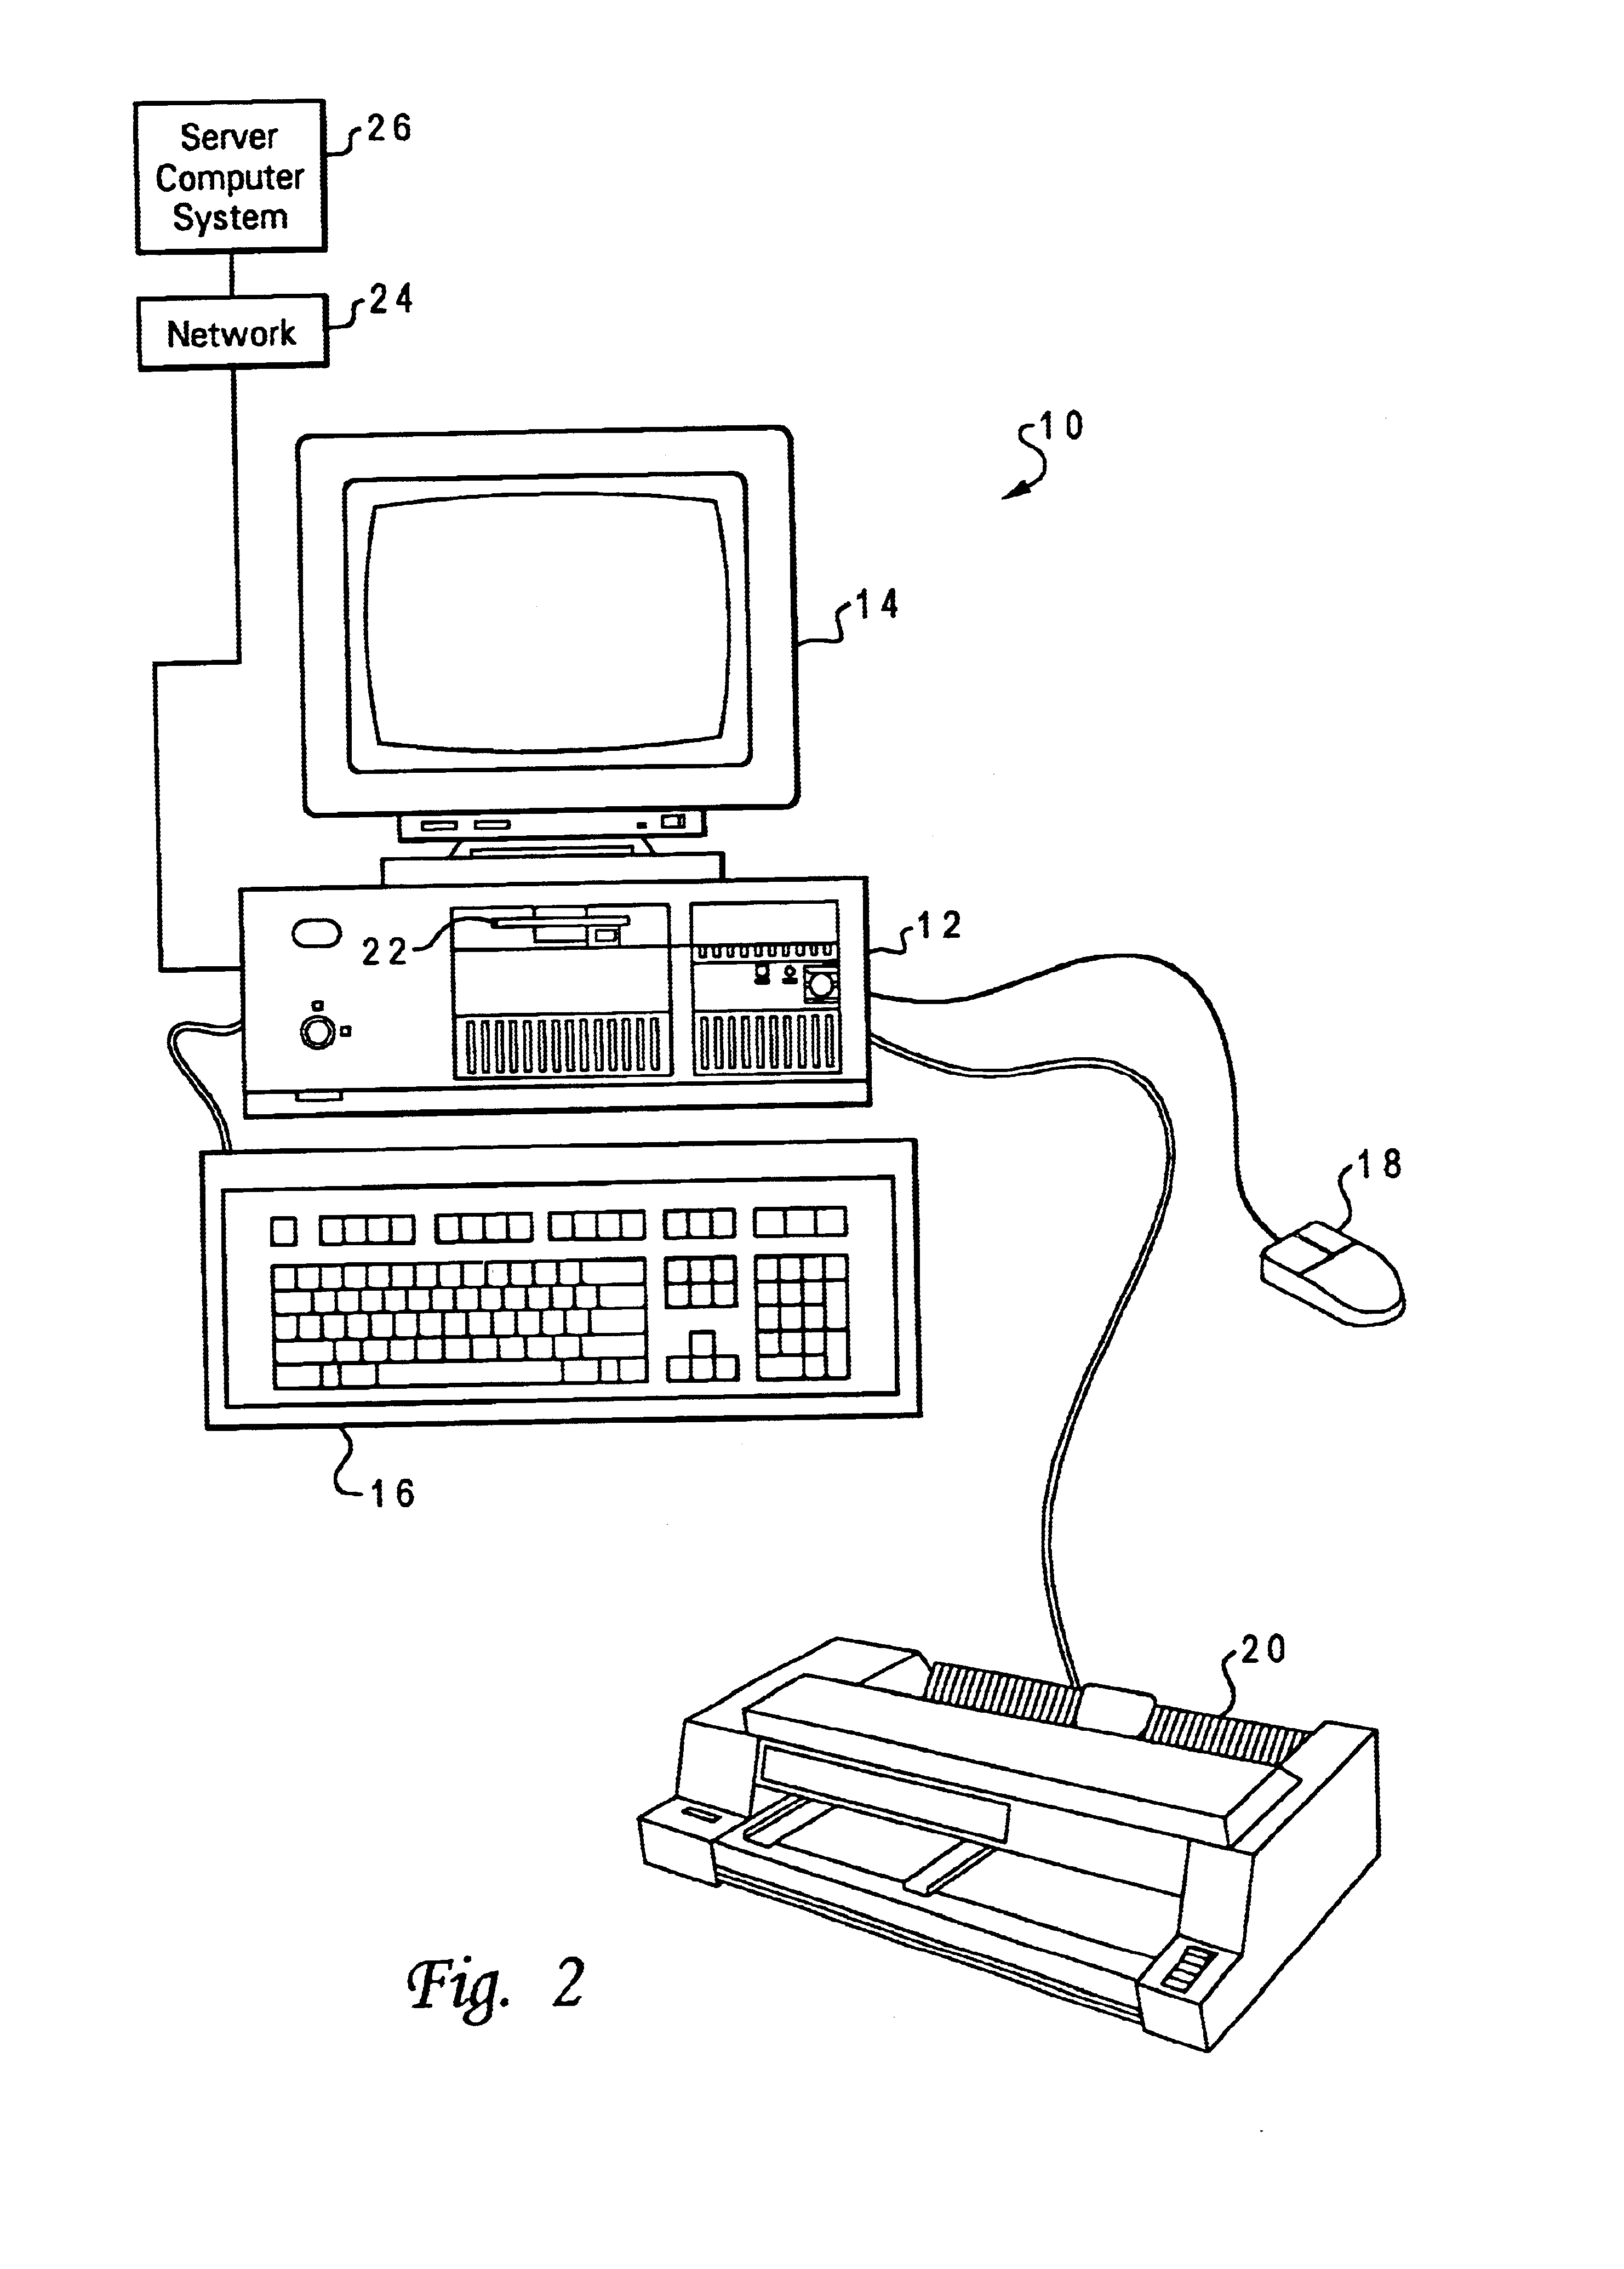 Virtual floppy diskette image within a primary partition in a hard disk drive and method for booting system with virtual diskette